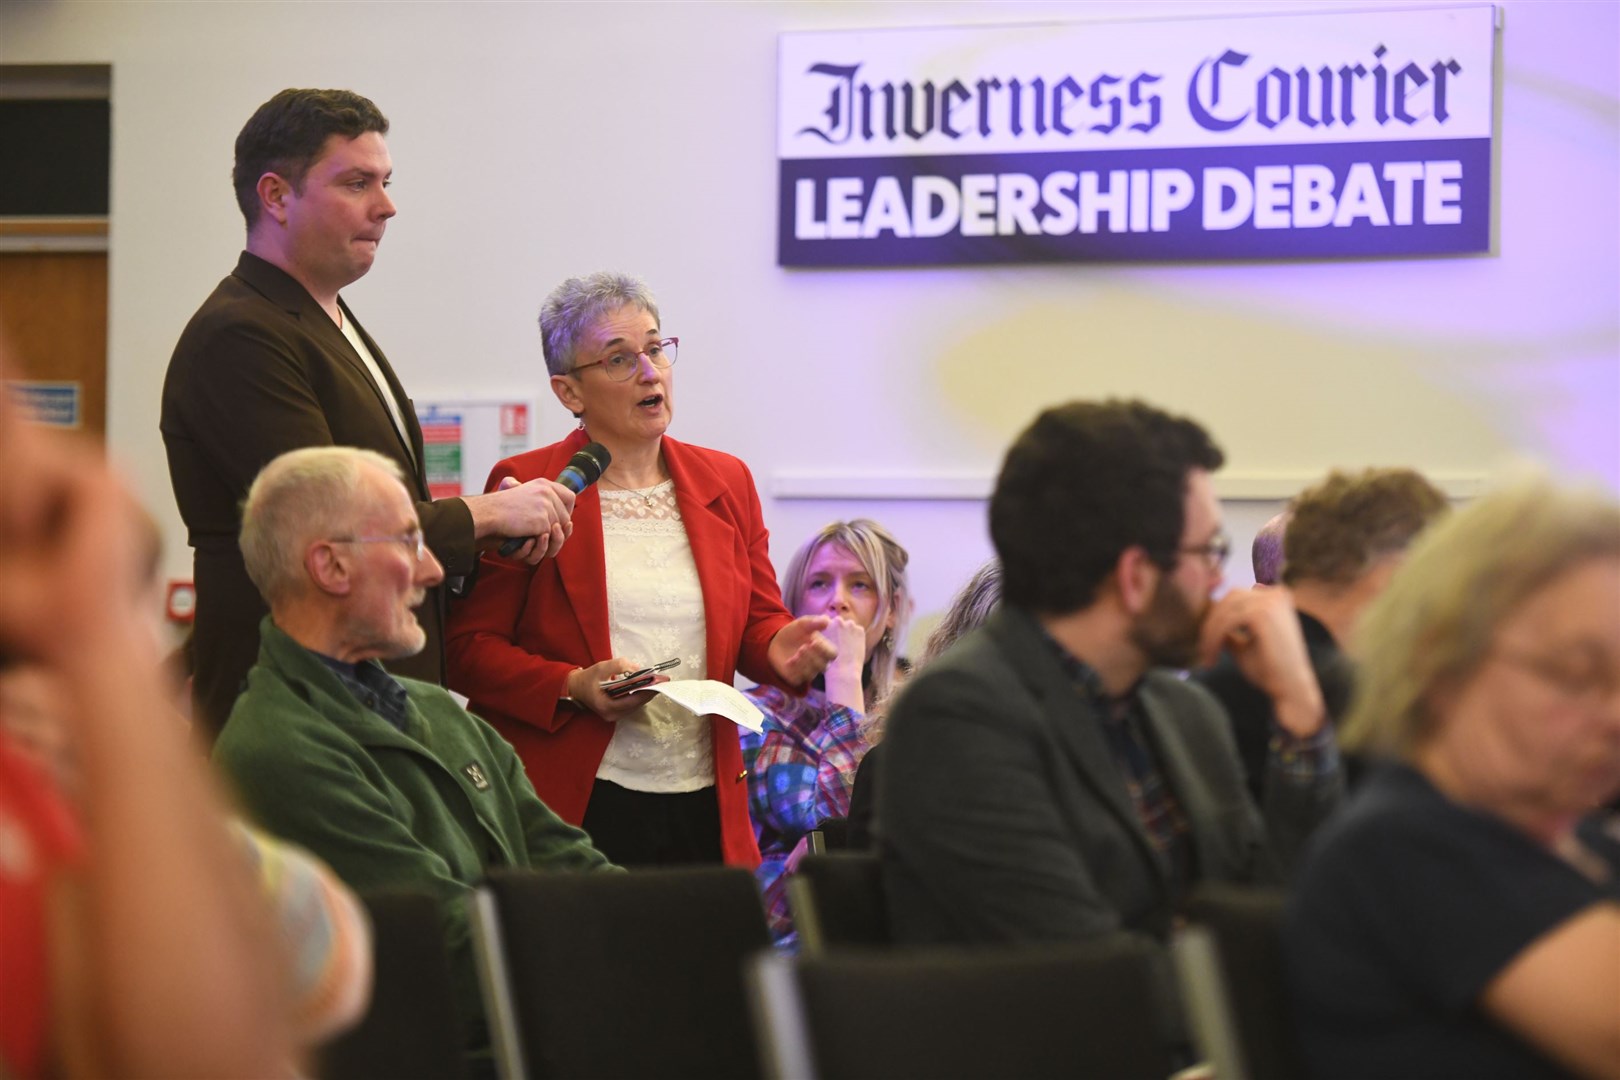 Trudy Morris asking her question. Picture: James Mackenzie.